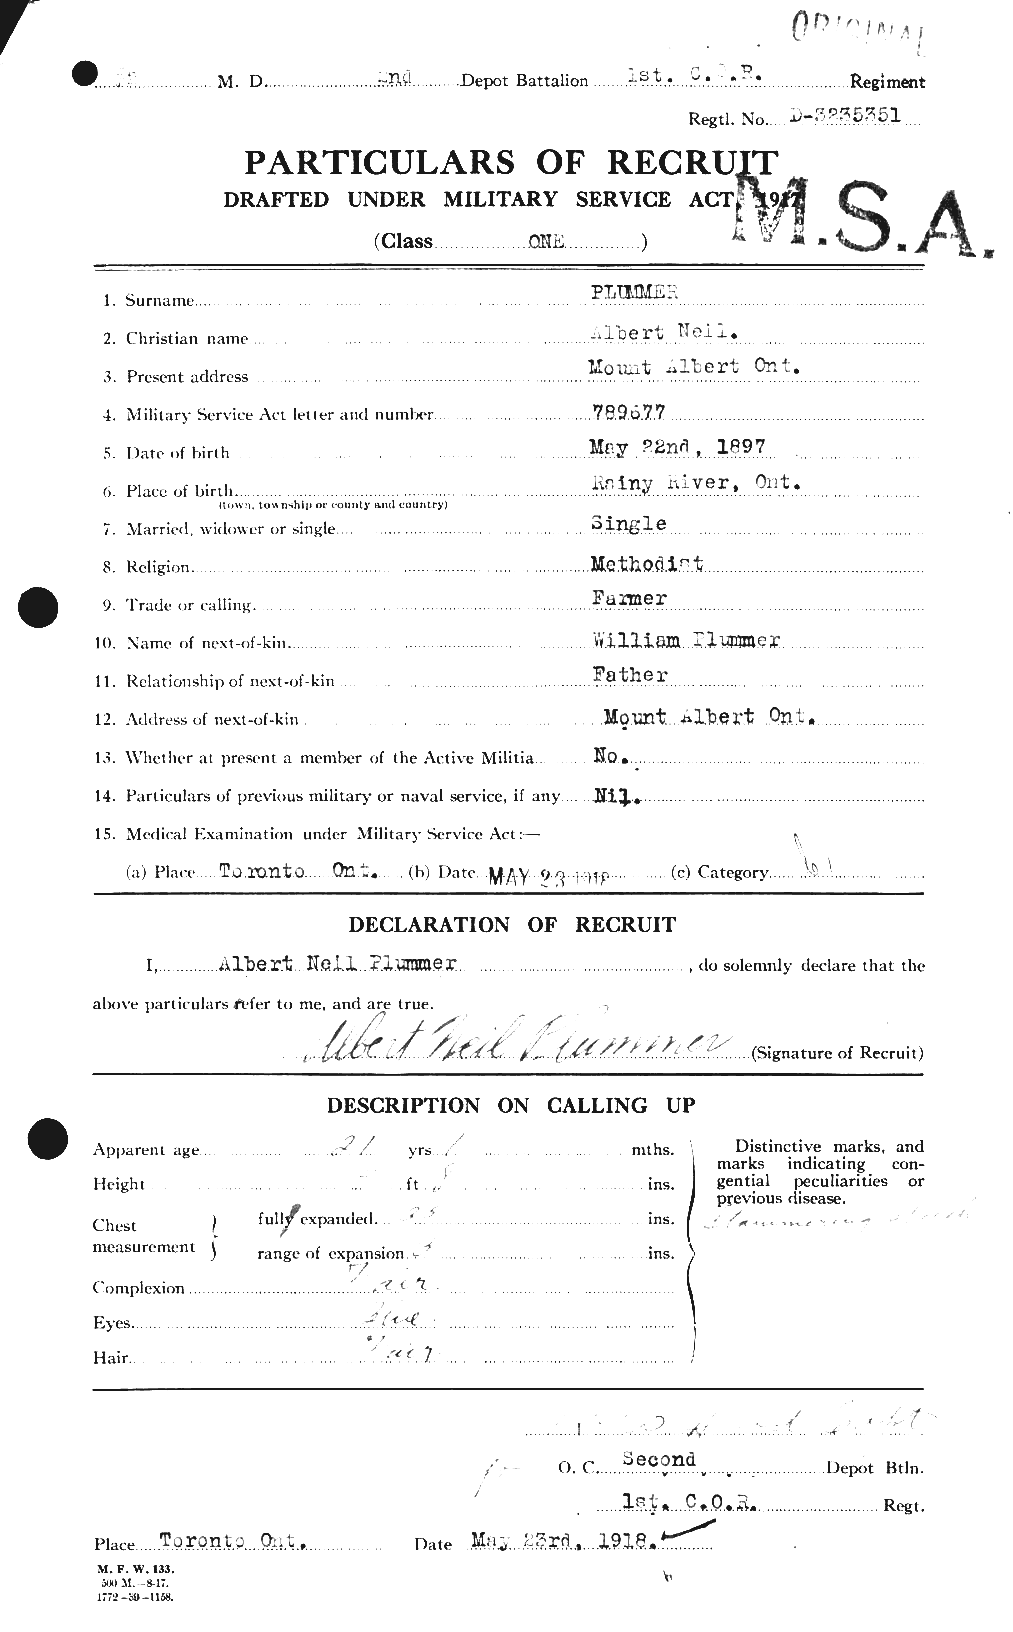 Personnel Records of the First World War - CEF 581407a